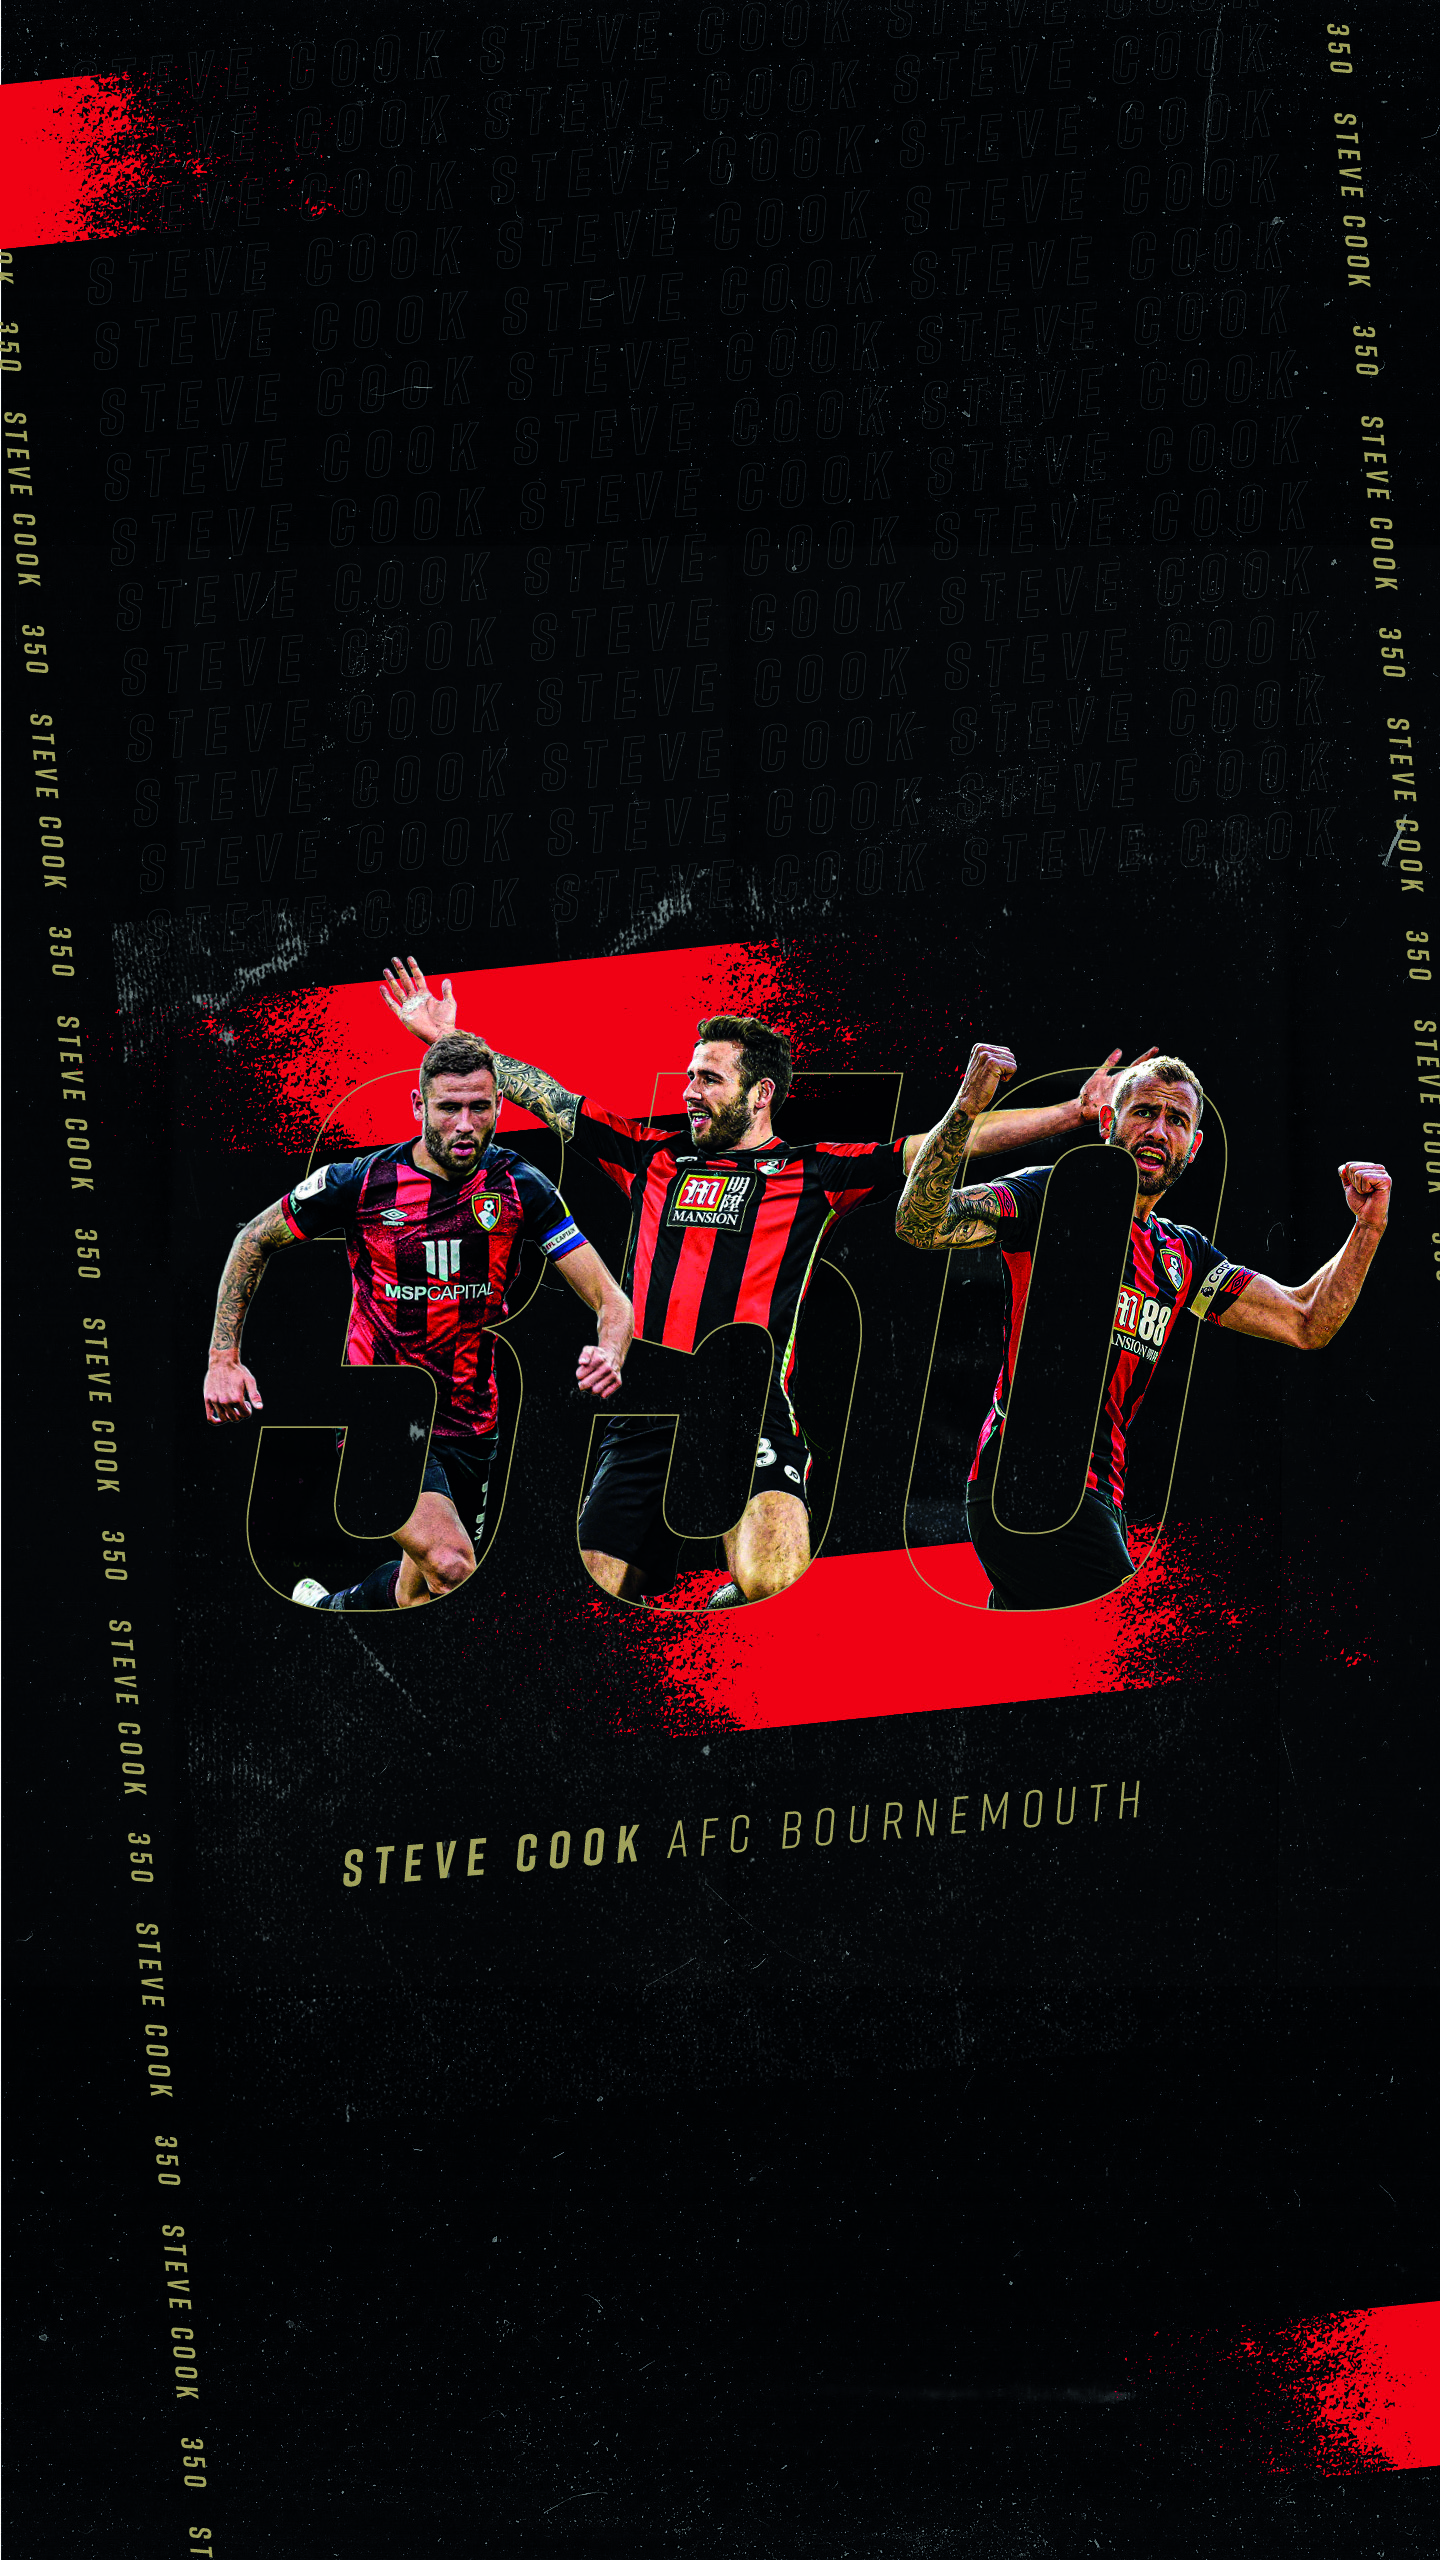 Afc Bournemouth Wallpapers